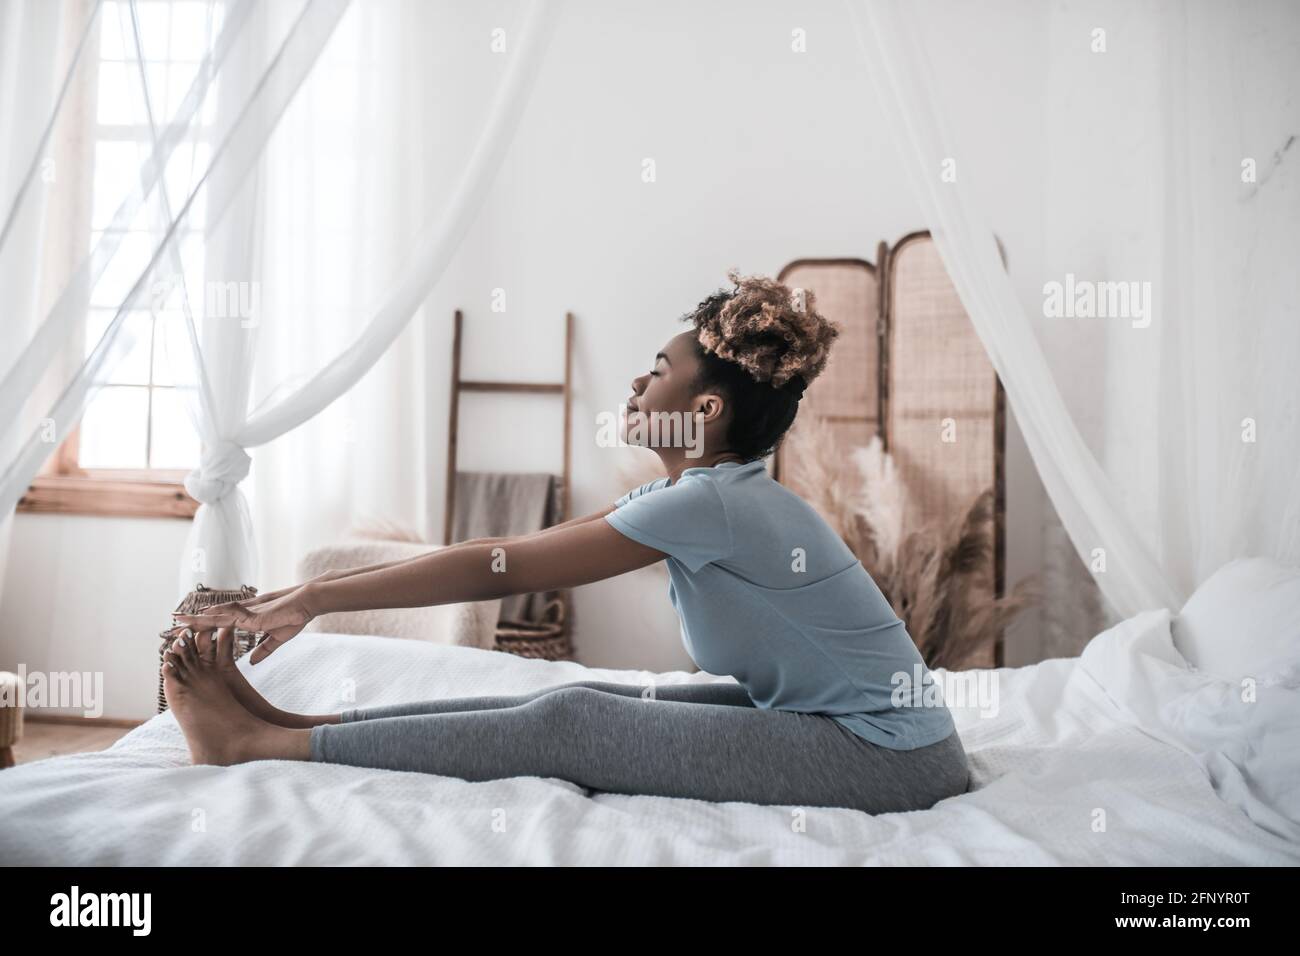 African american woman sitting on bed holding toes Stock Photo